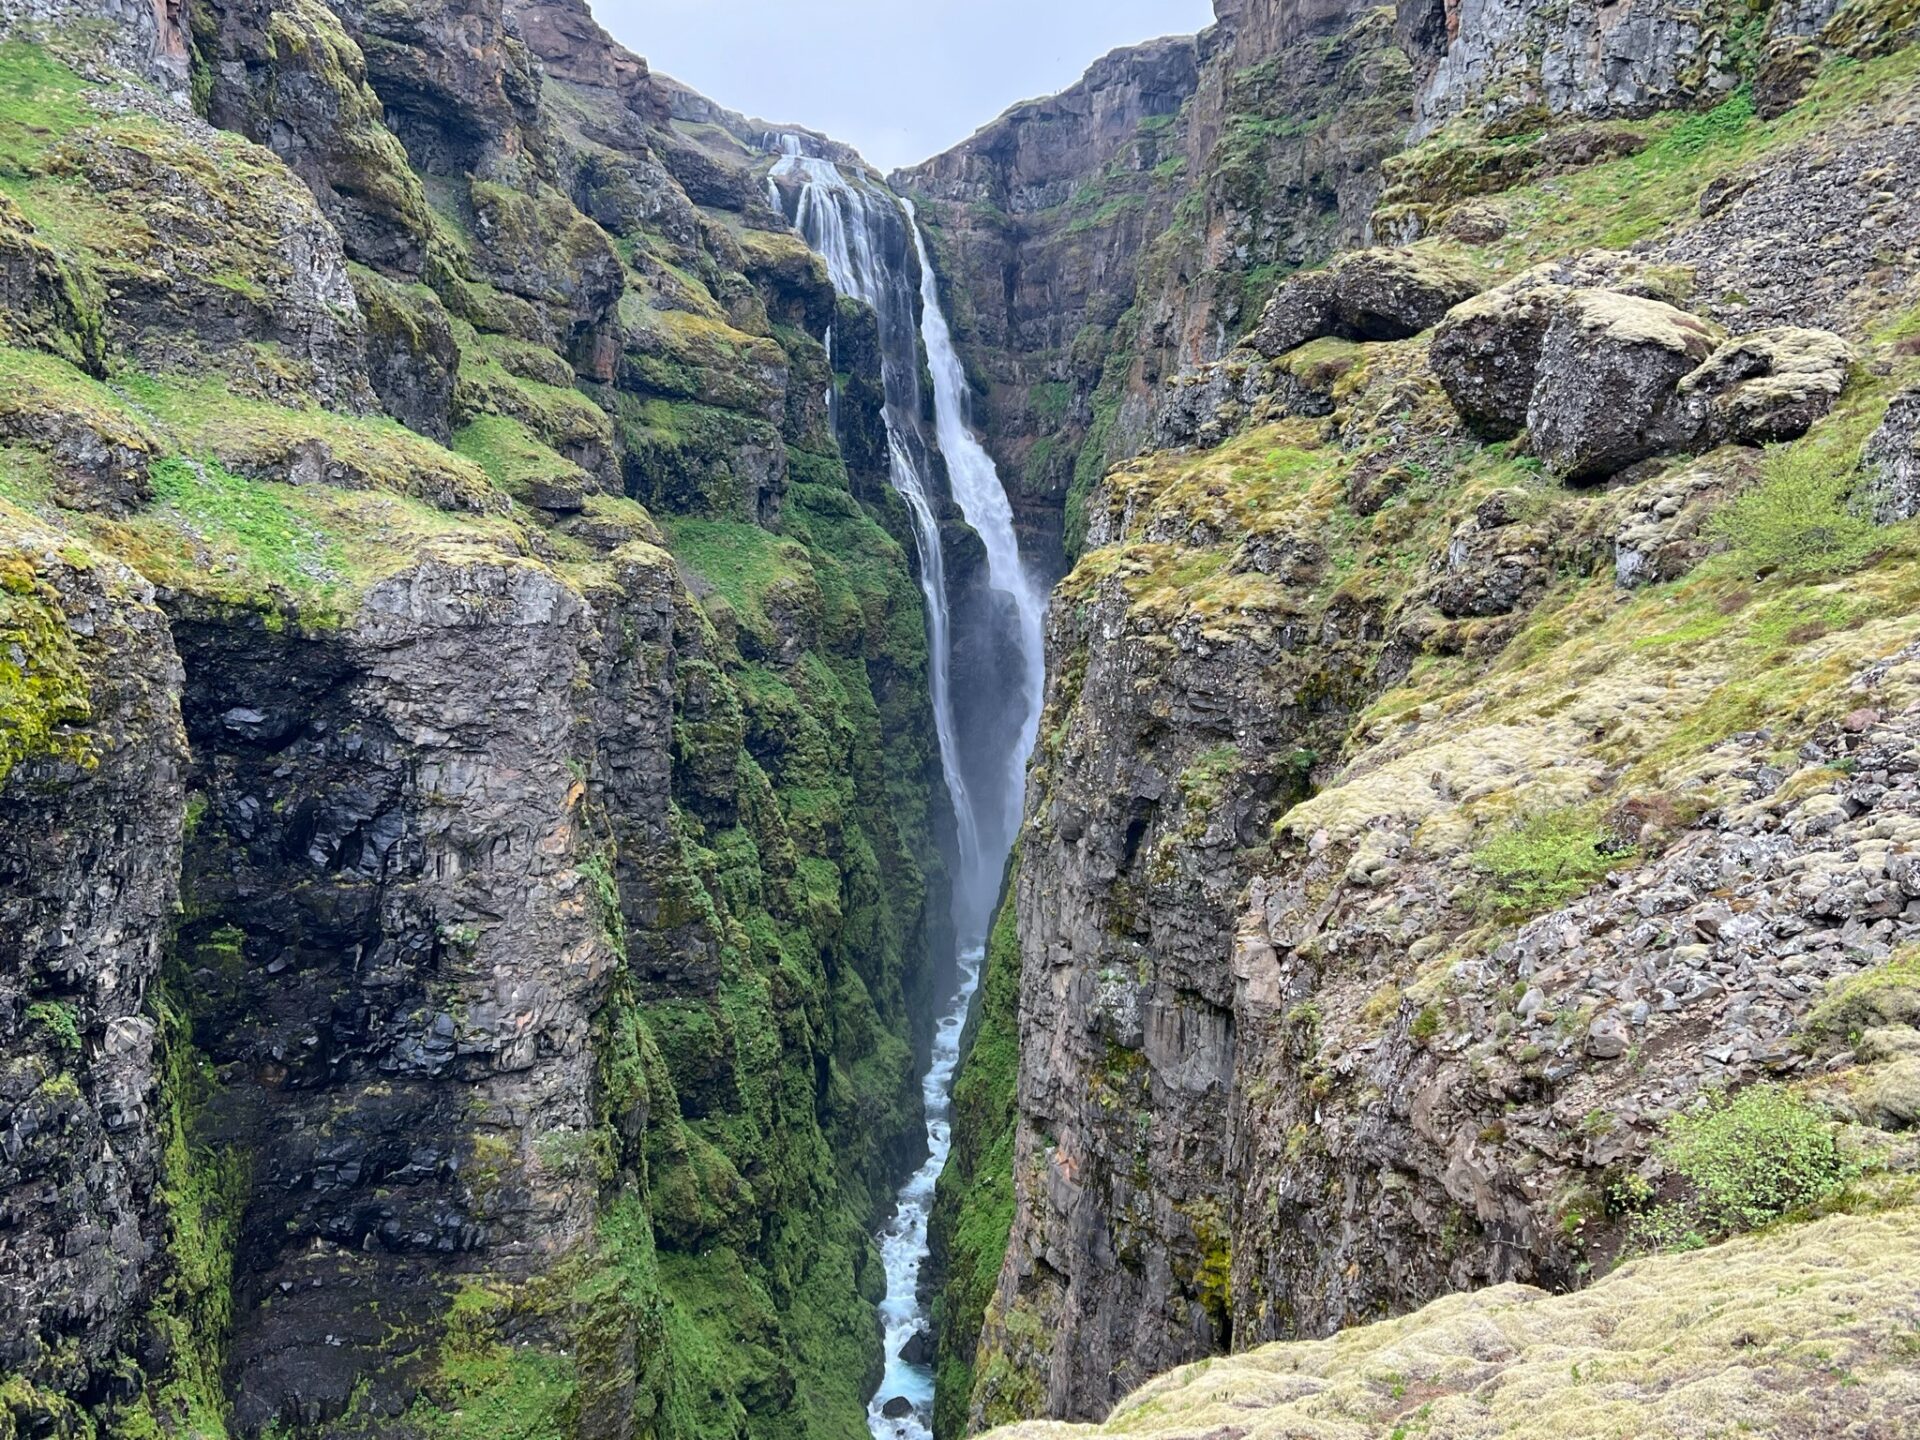 Hiking Glymur Waterfall in Iceland: What to Know